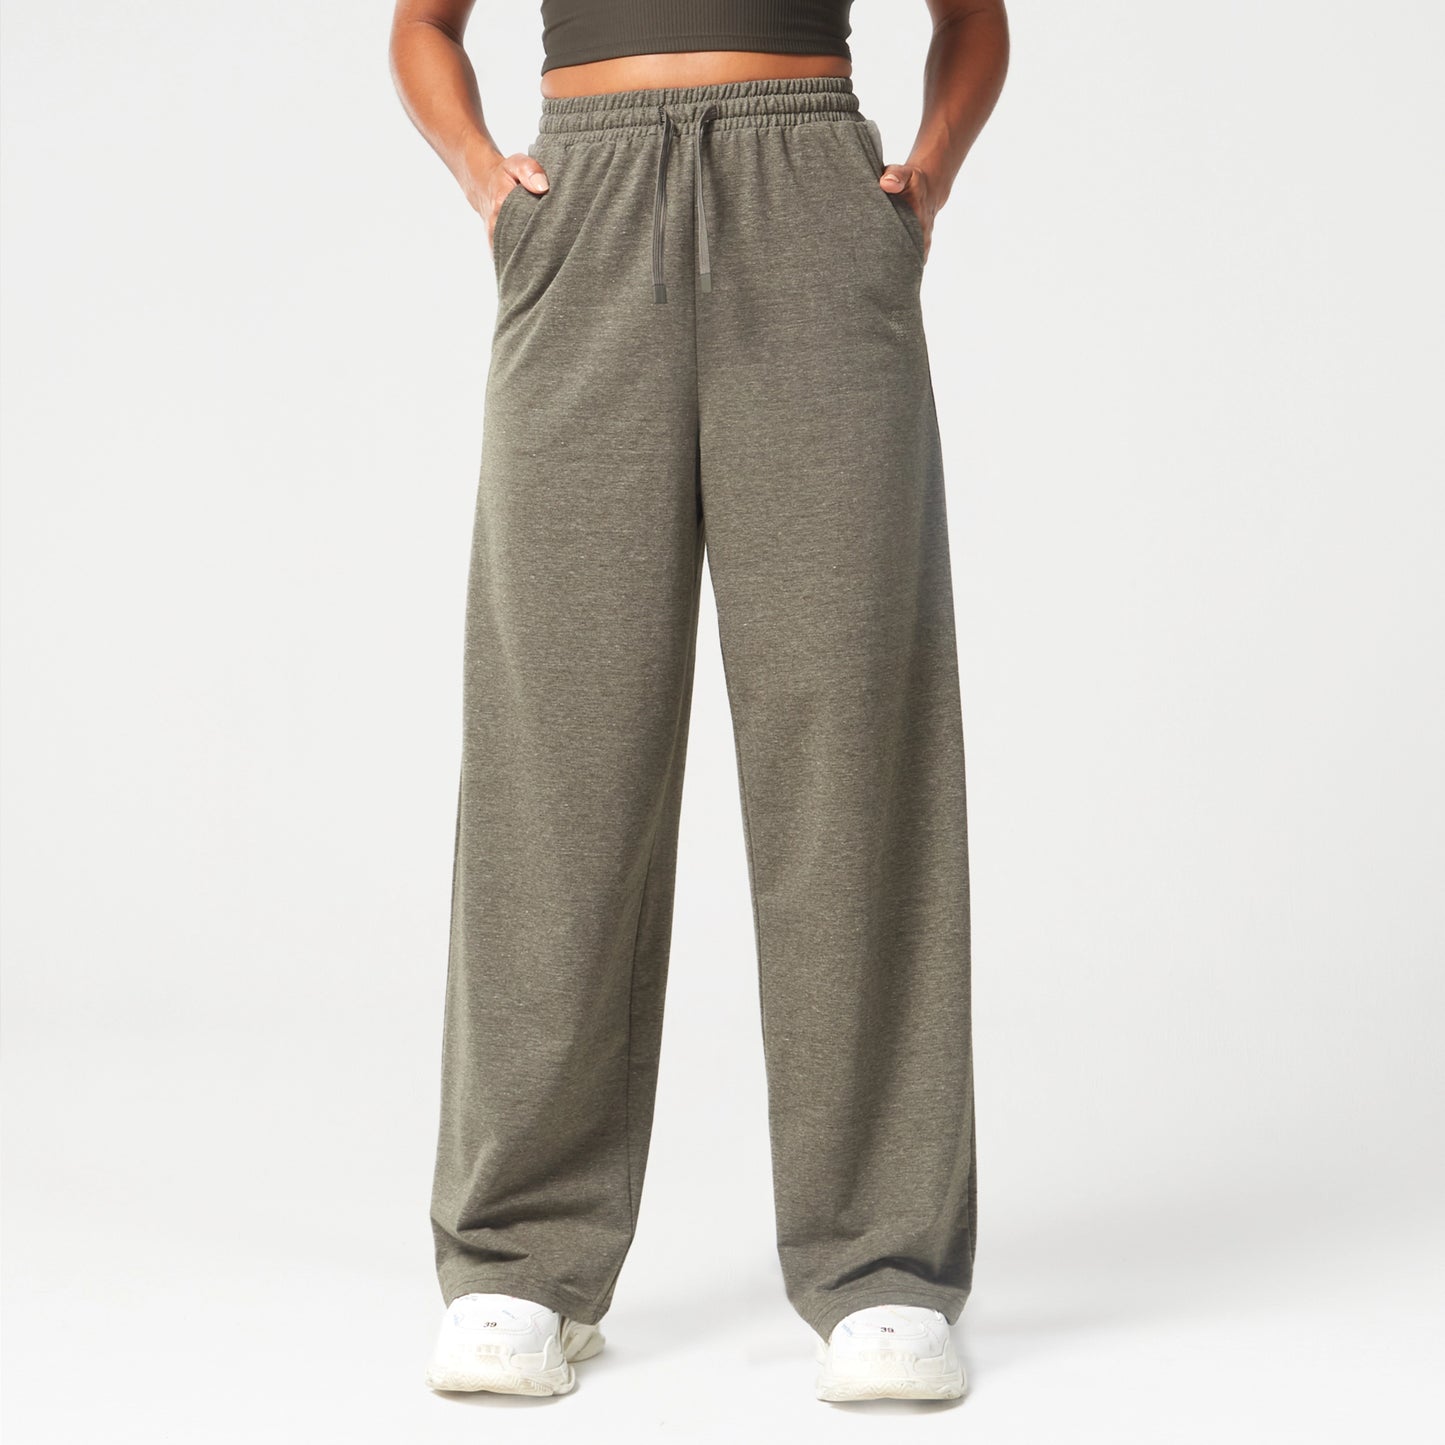 AE | Code Live in Joggers - Khaki Marl | Workout Pants Women | SQUATWOLF